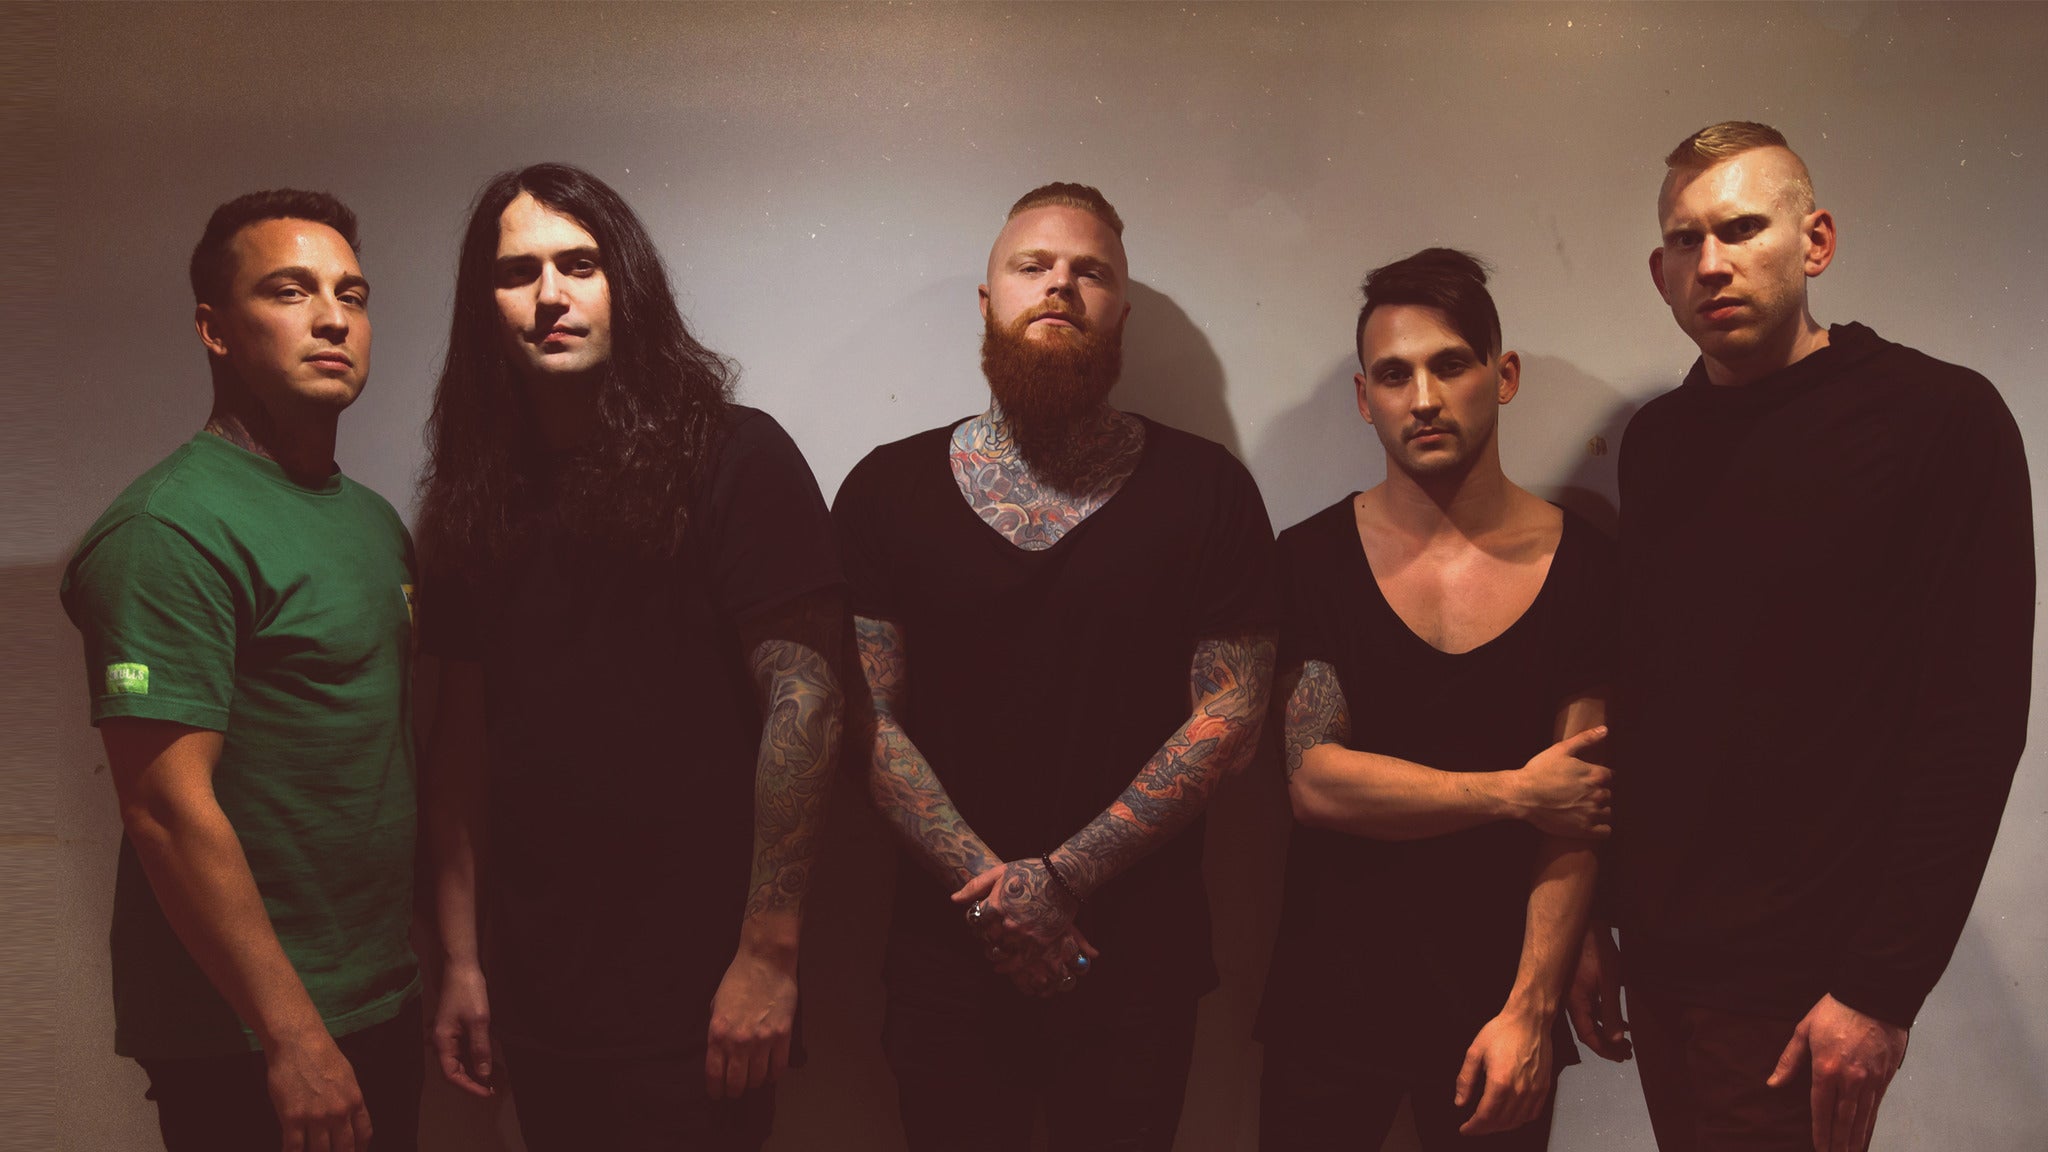 updated presale password for BORN OF OSIRIS, ATTILA w/ TRAITORS, EXTORTIONIST, NOT ENOUGH SPACE presale tickets in San Diego